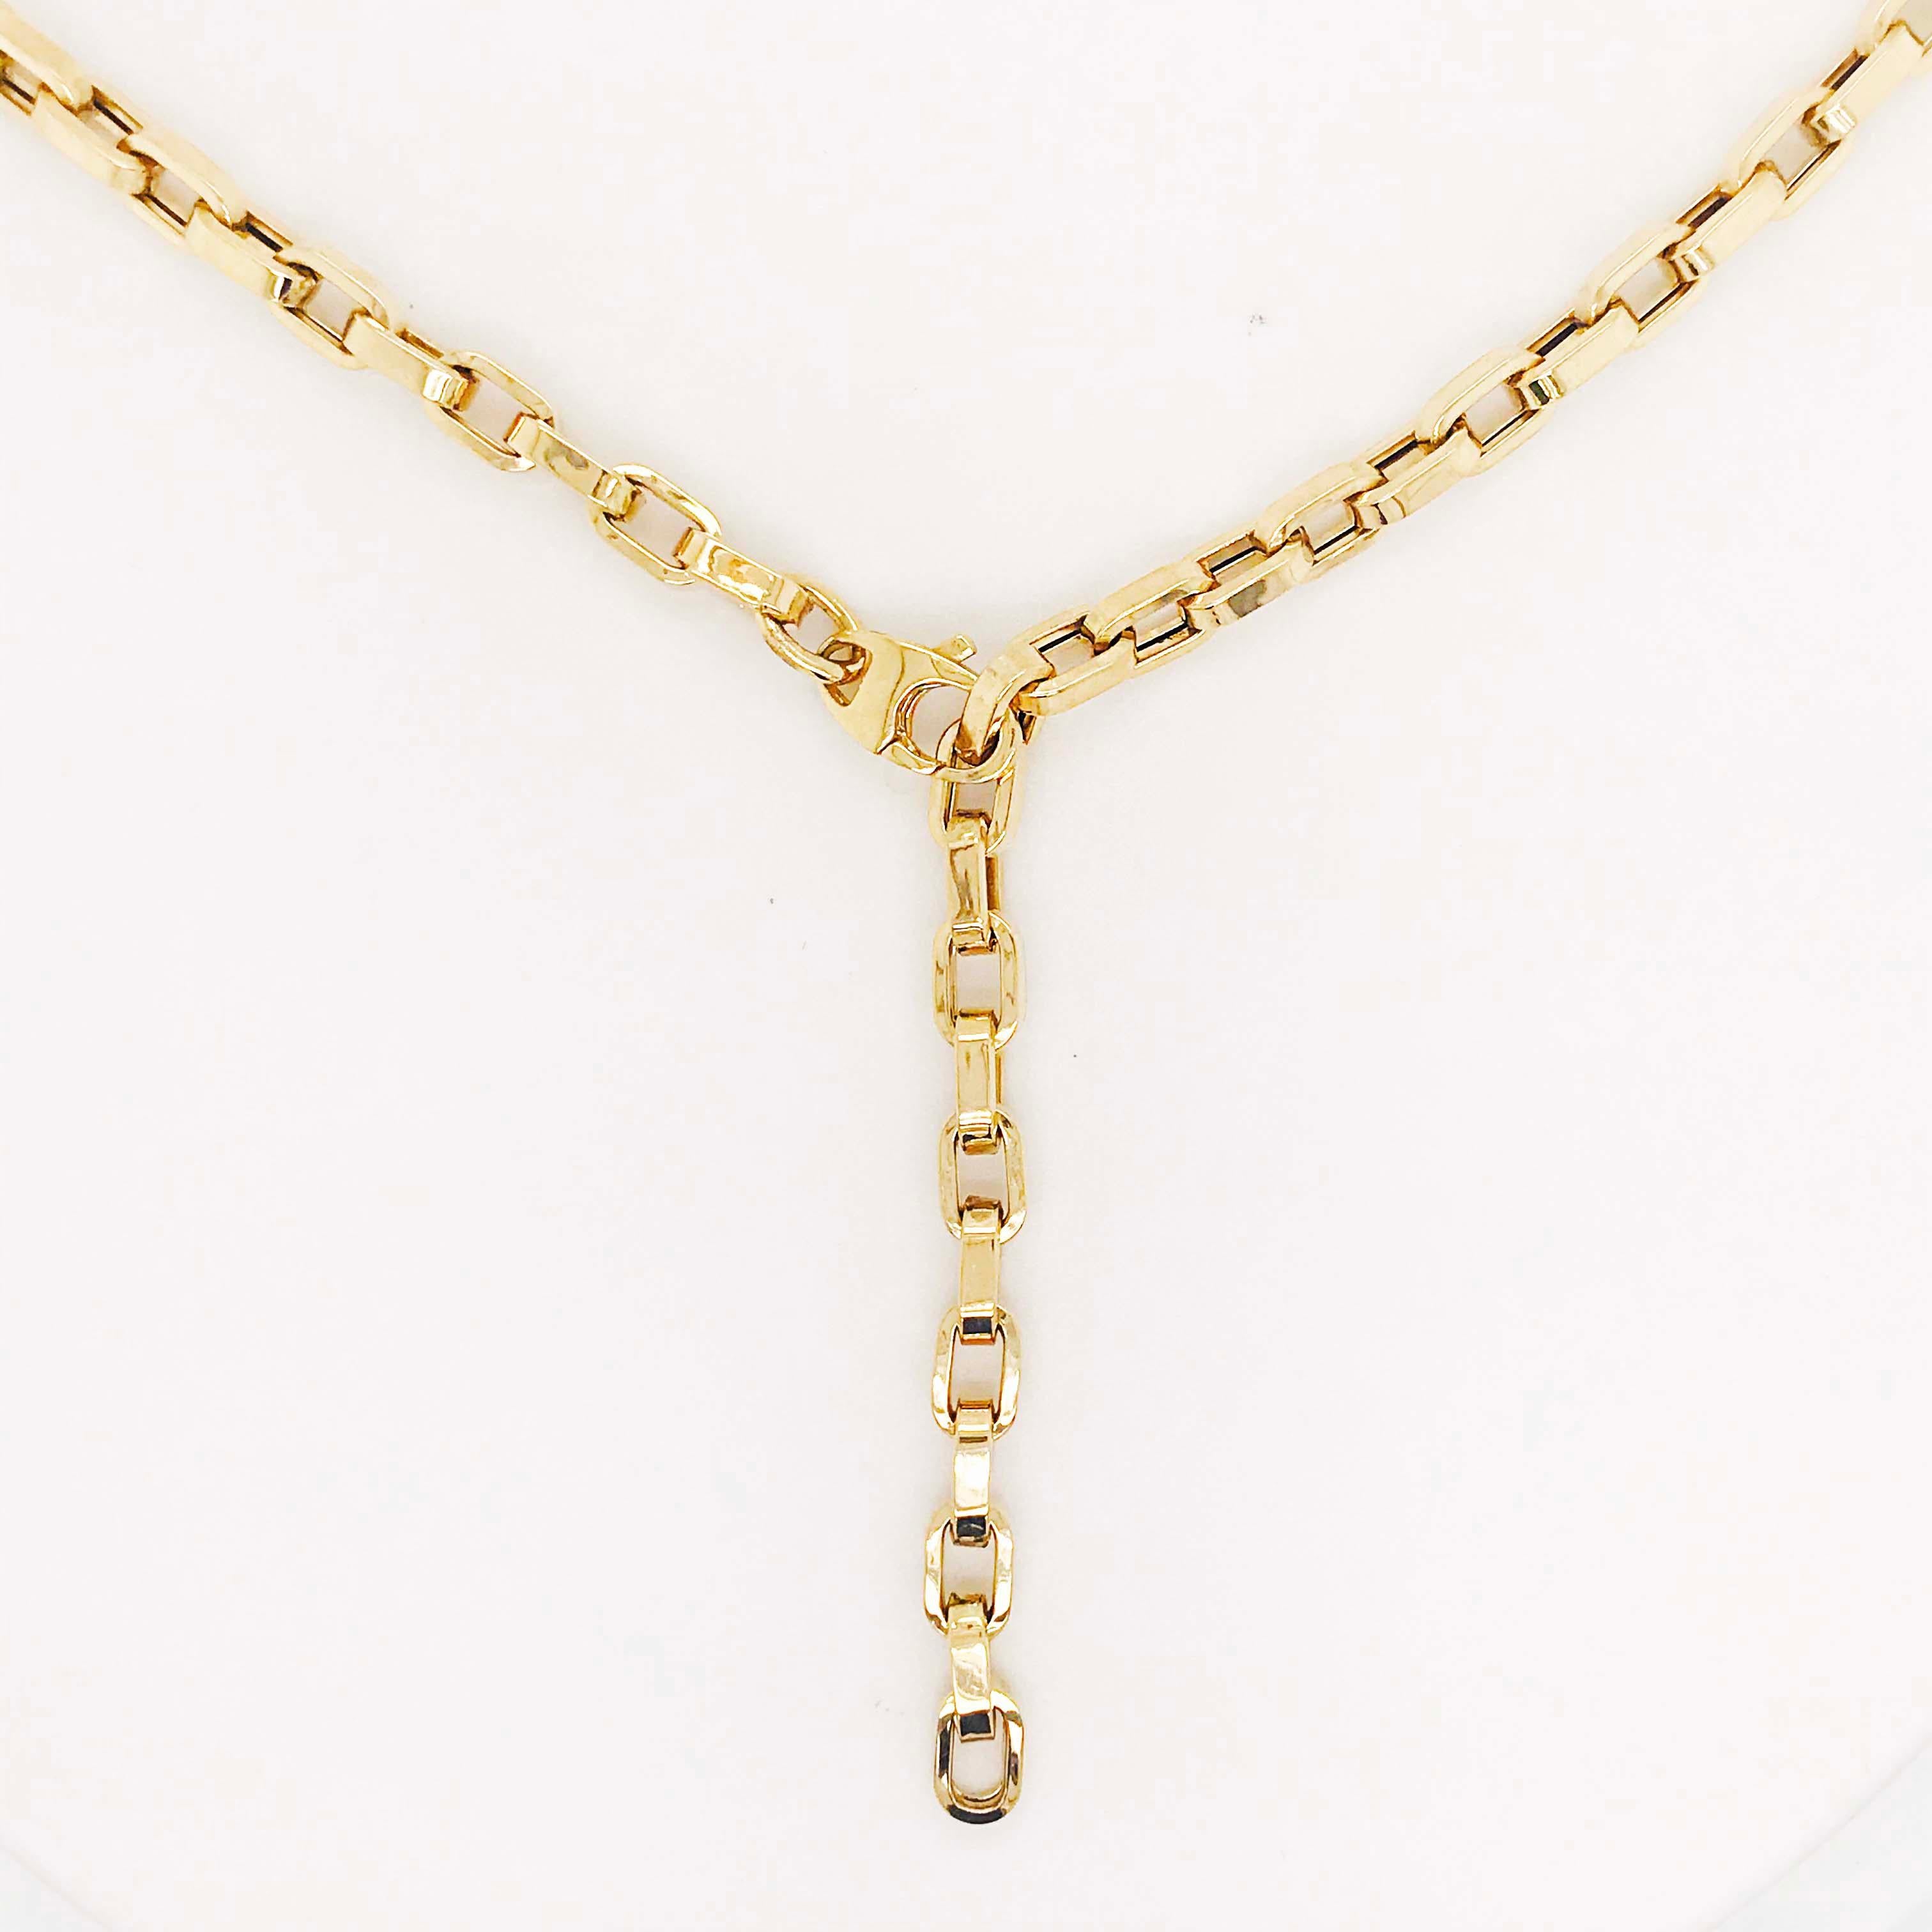 gold chain with large clasp